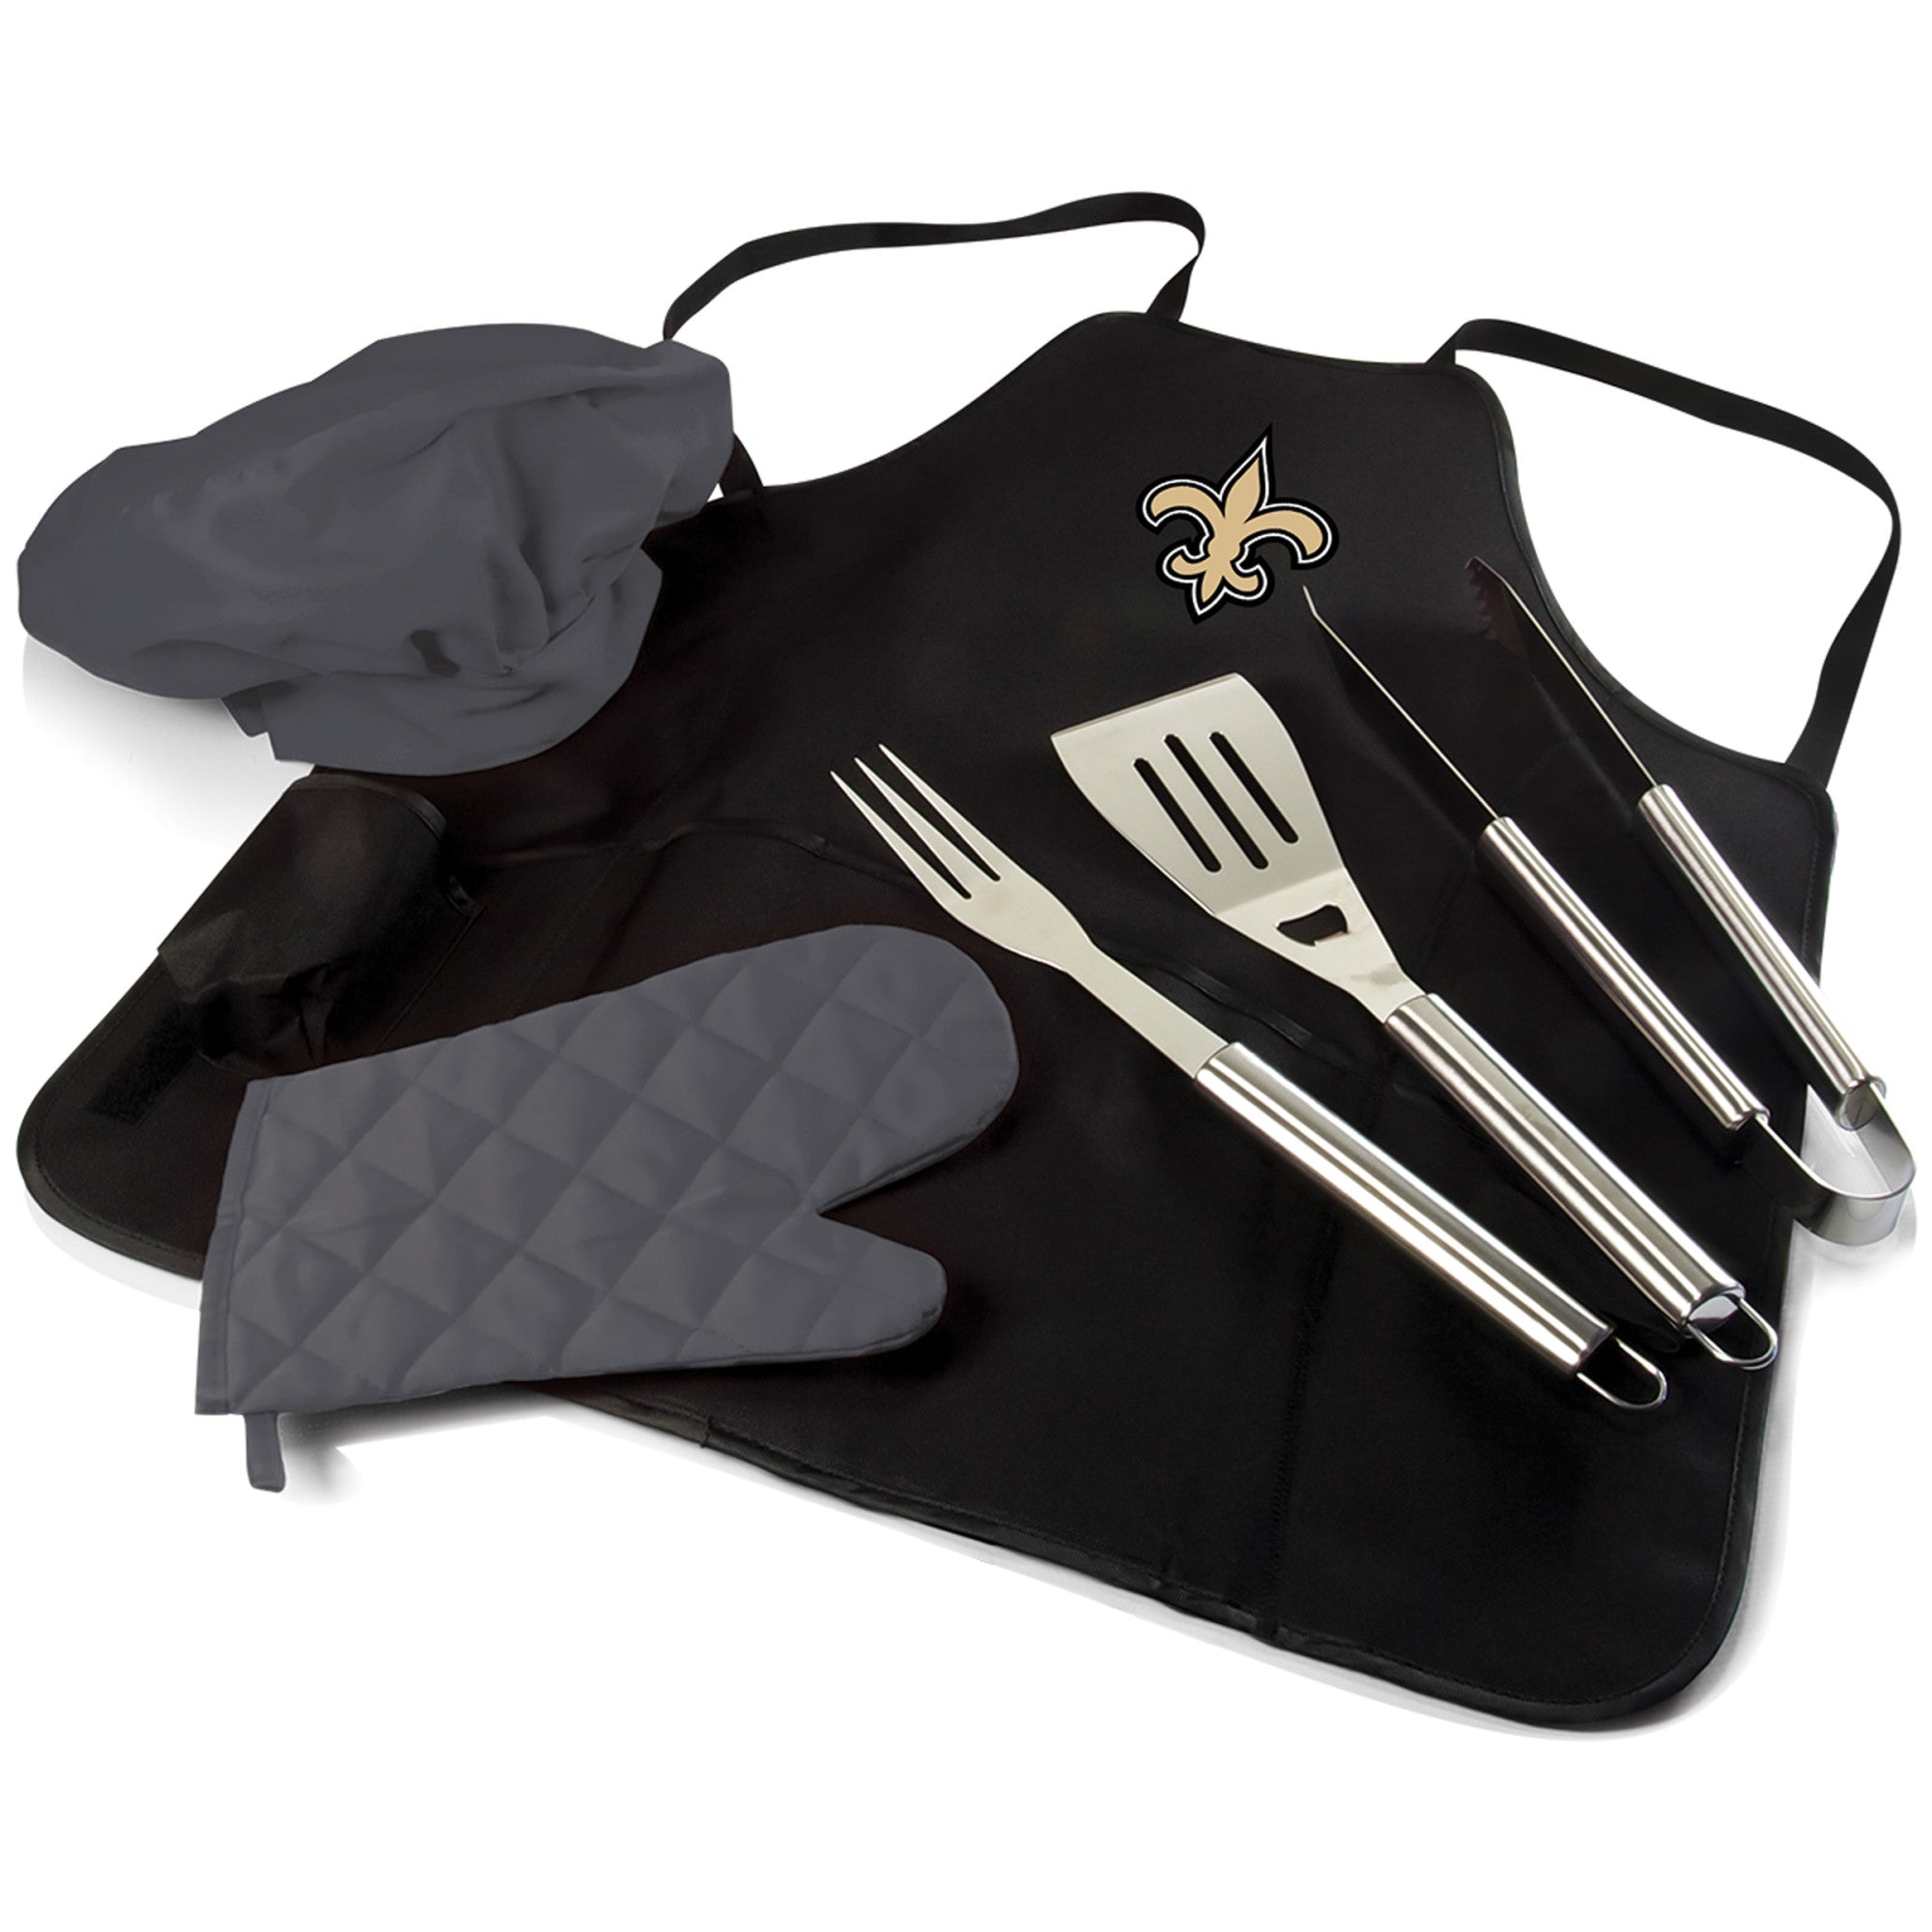 New Orleans Saints - BBQ Apron Tote Pro Grill Set, (Black with Gray Accents)